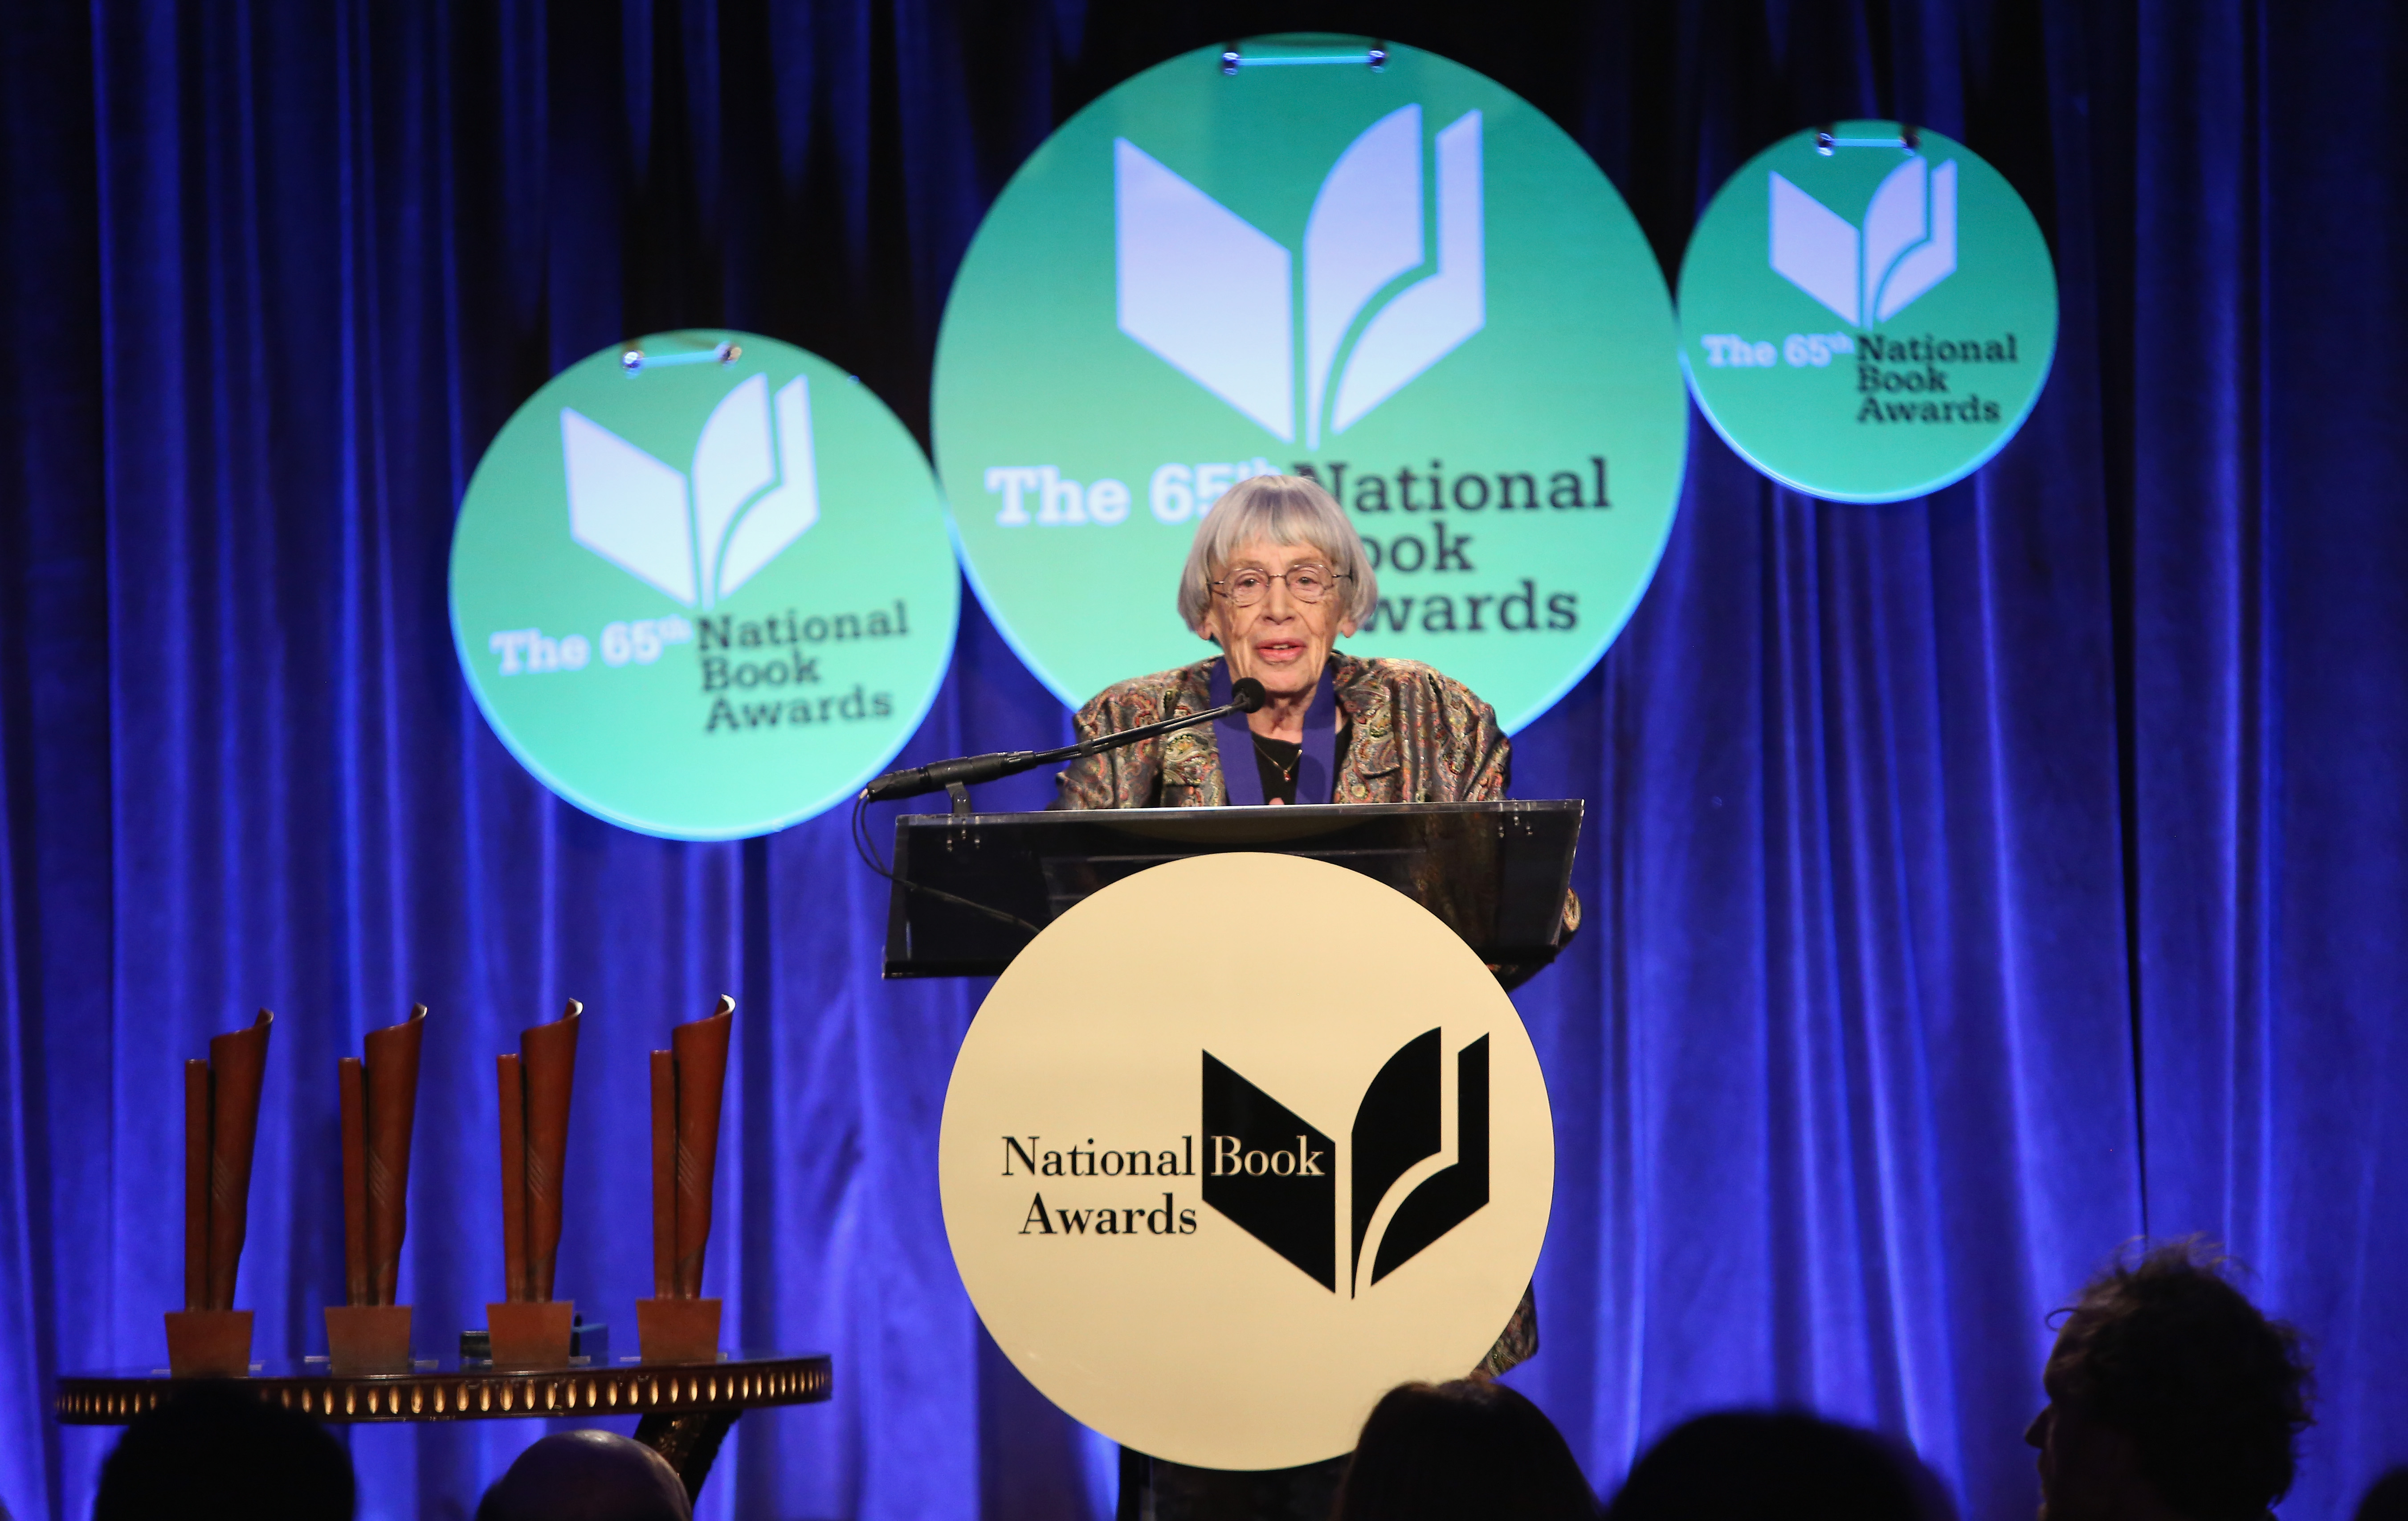 NEW YORK, NY - NOVEMBER 19: Ursula K. Le Guin attends 2014 National Book Awards on November 19, 2014 in New York City. (Photo by Robin Marchant/Getty Images)